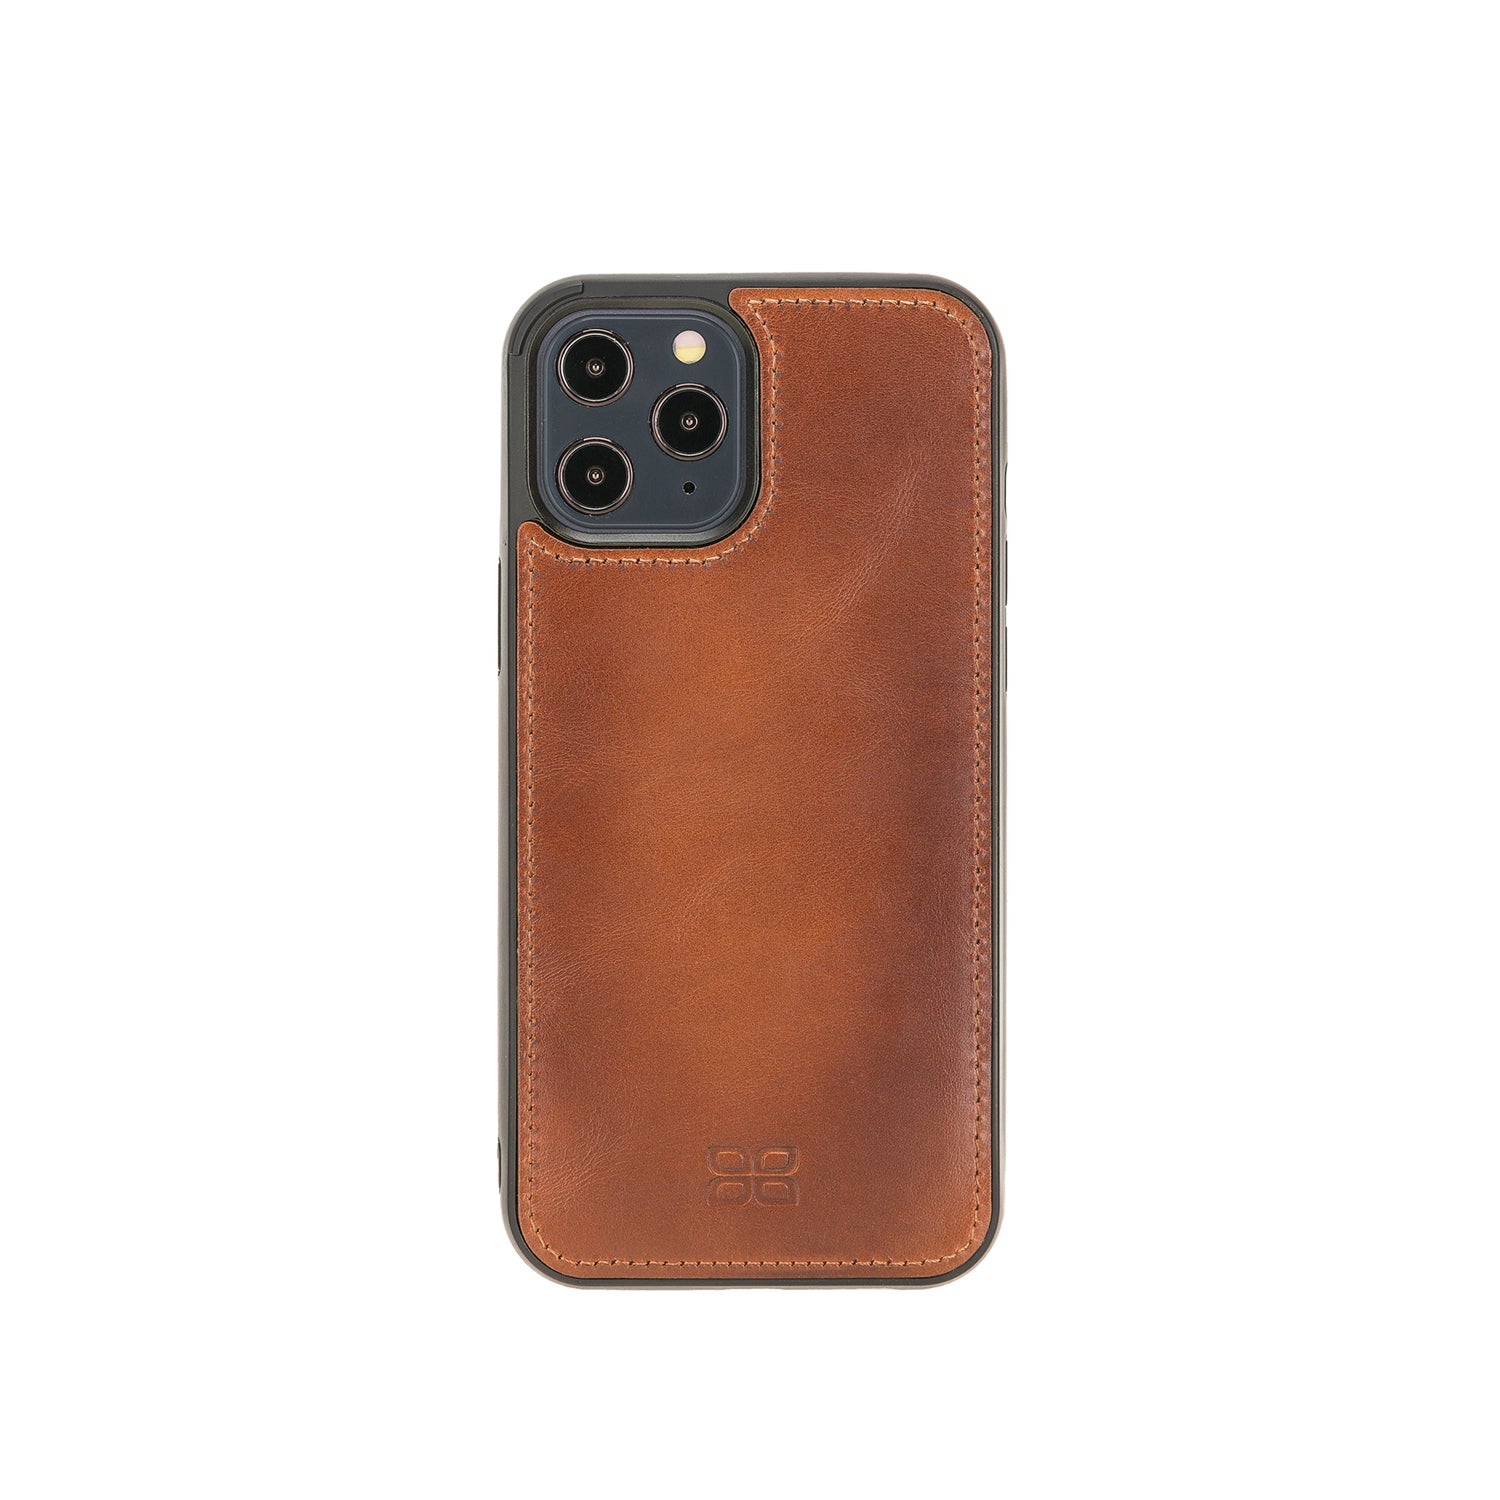 Flex Cover Leather Back Case for iPhone 12 Pro (6.1") - EFFECT BROWN - saracleather